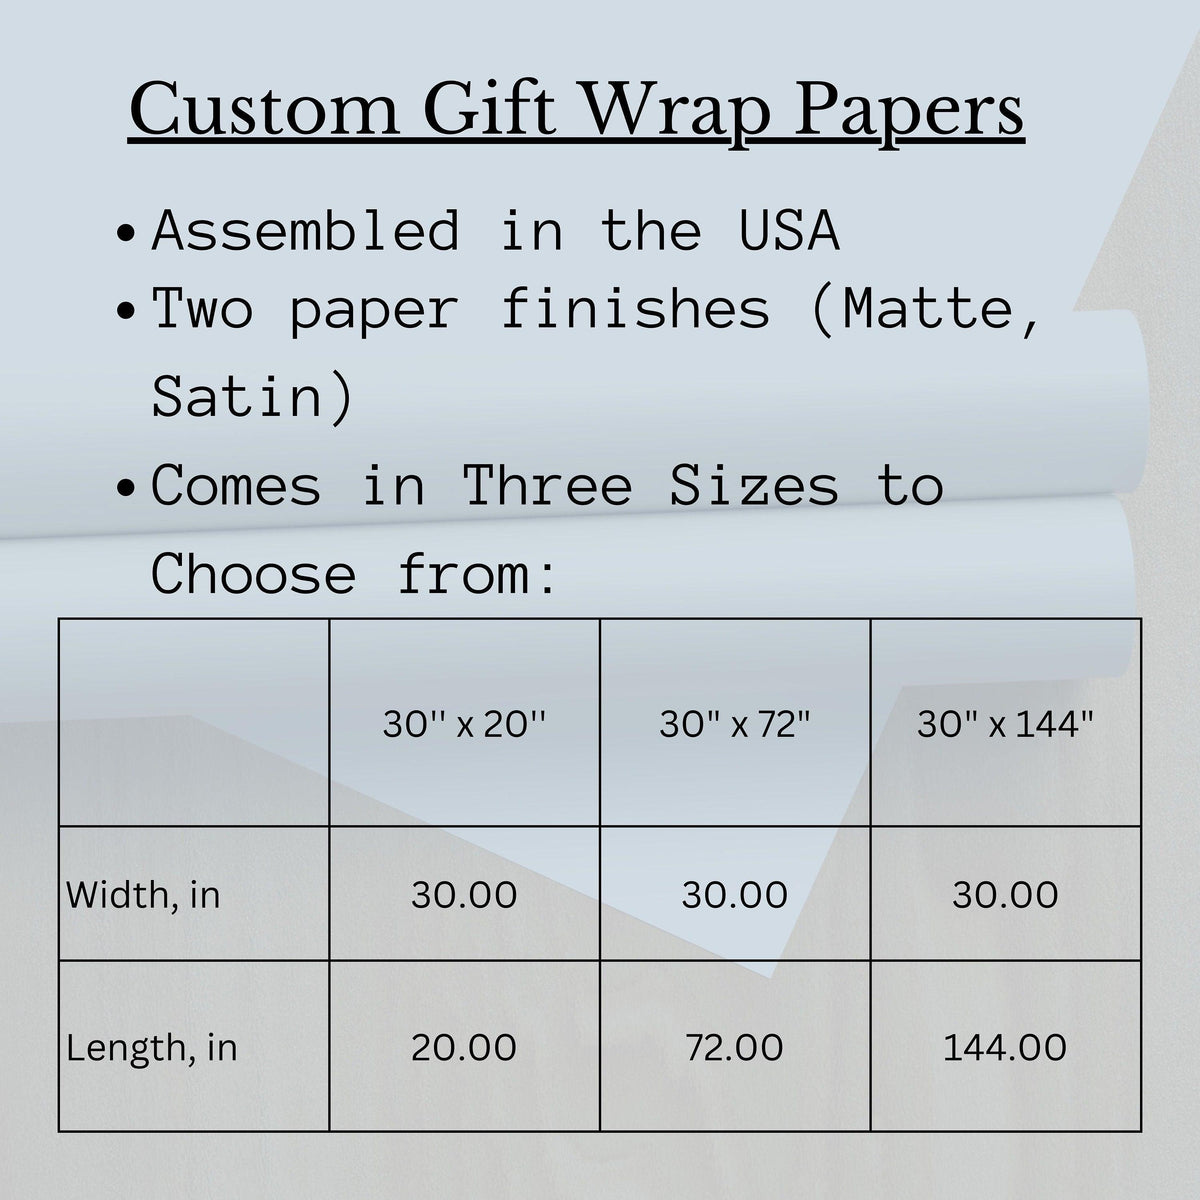 Custom Cottagecore Gift Wrap Paper Boho Floral Custom Gift Wrapping Paper Satin Wildflower Wrap Bright Boho Floral Gift Wrap Matte Paper - The Ripple Effect Co.US